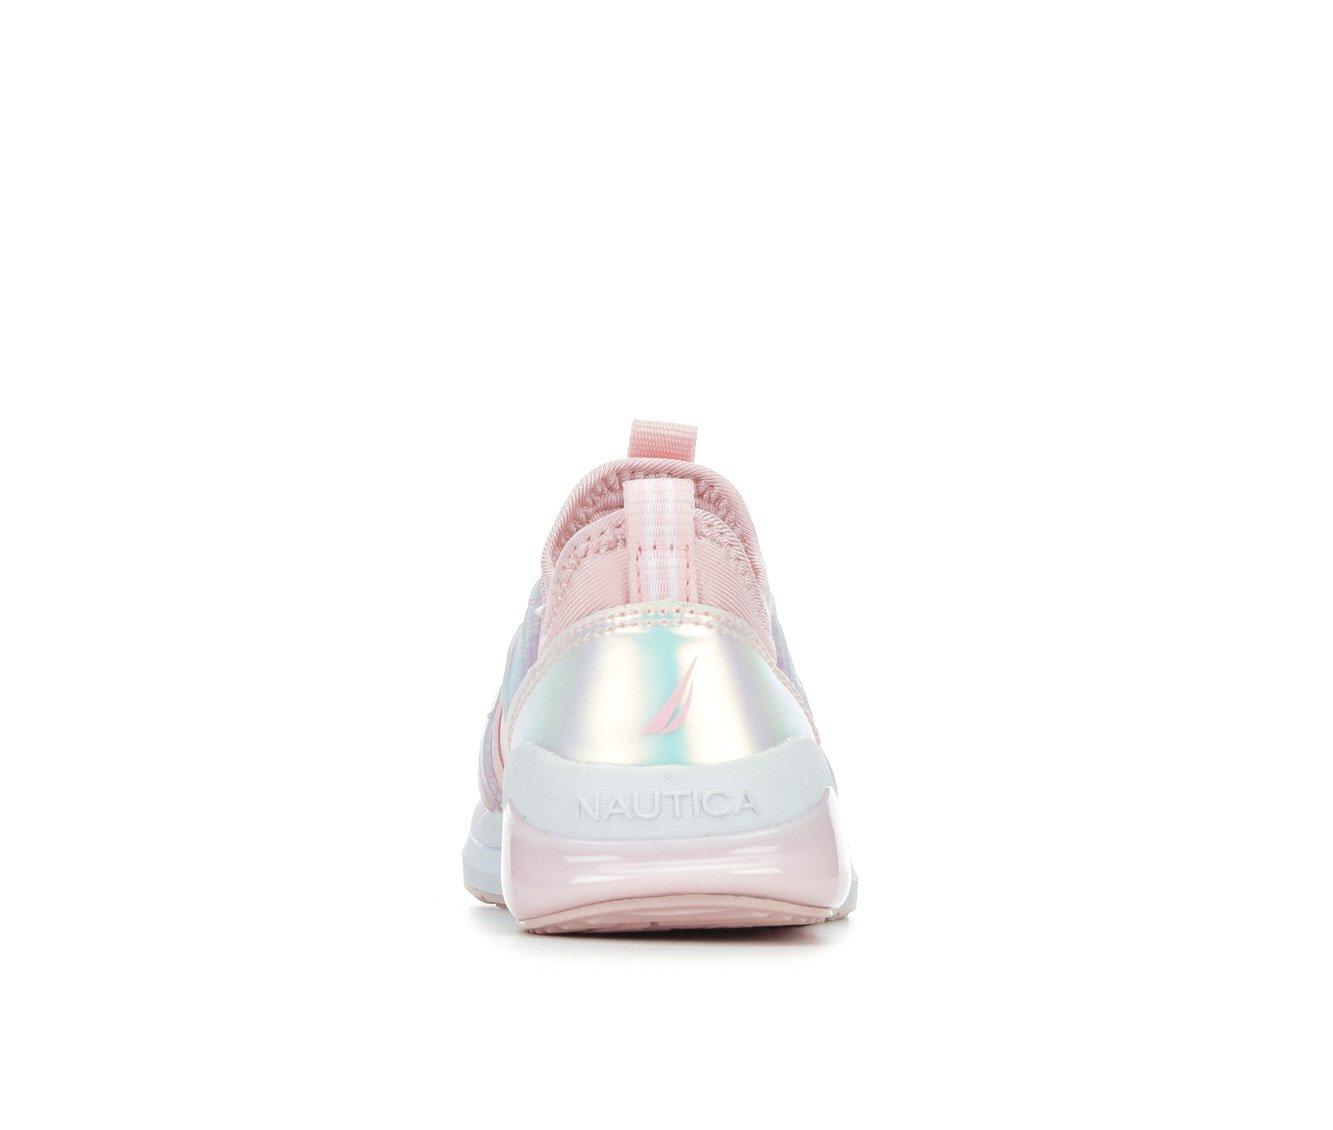 Girls' Nautica Toddler & Little Kid Parks Buoy Light-Up Sneakers